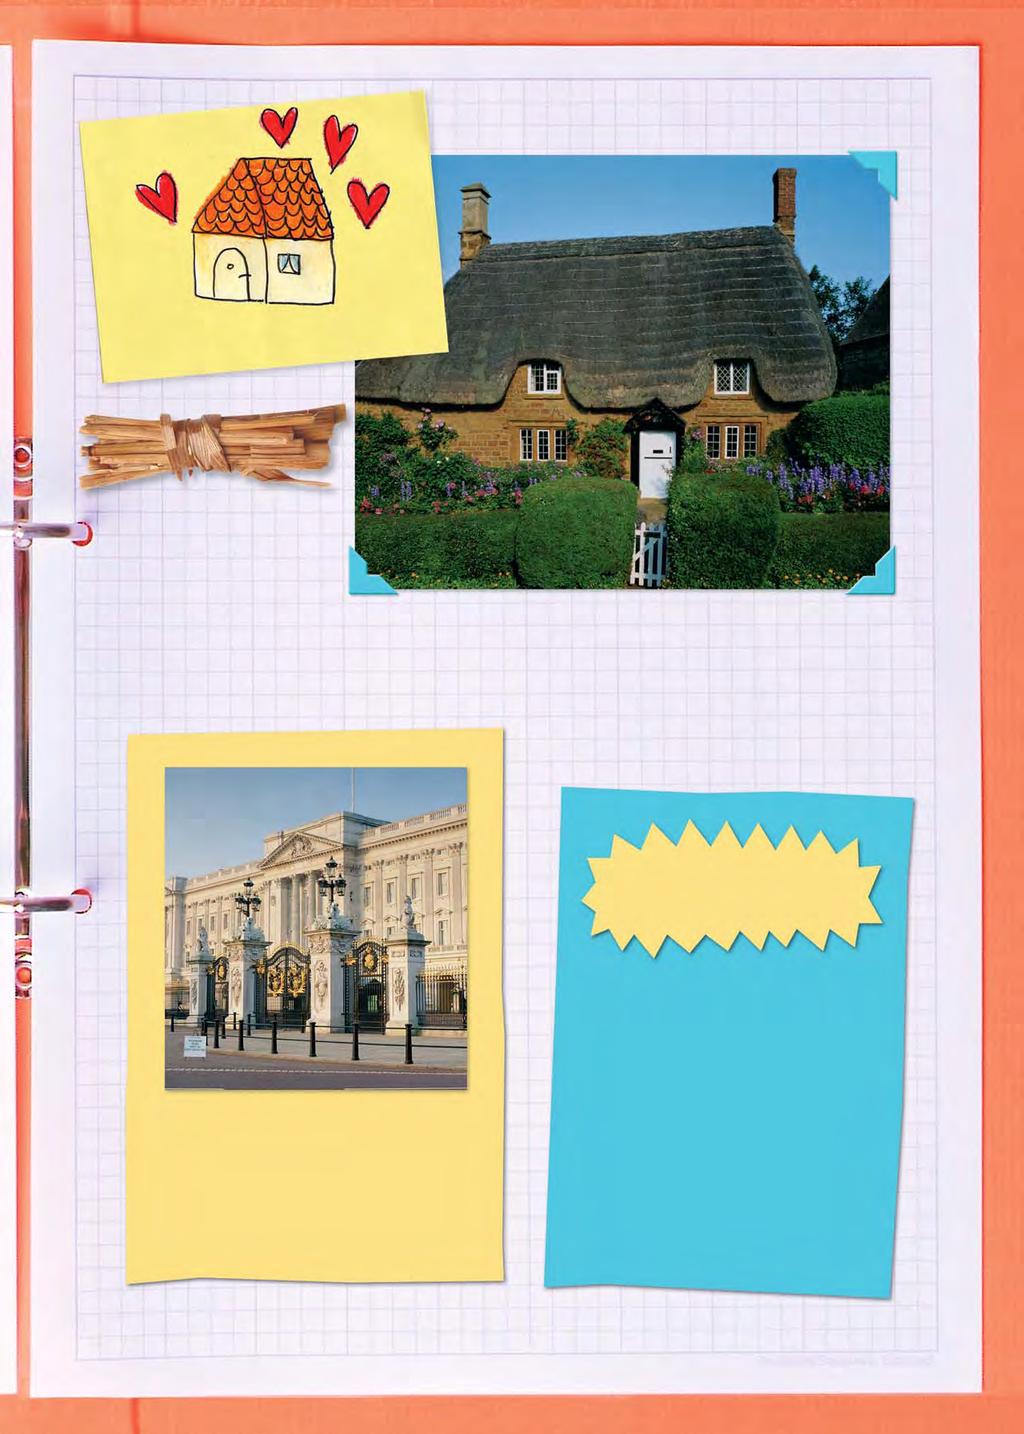 CULTURE SCRAPBOOK Home sweet home! This is straw. This is a thatched cottage. The roof is made of straw! 2 Sing. 20 This is a song about houses! This is a very special English house.